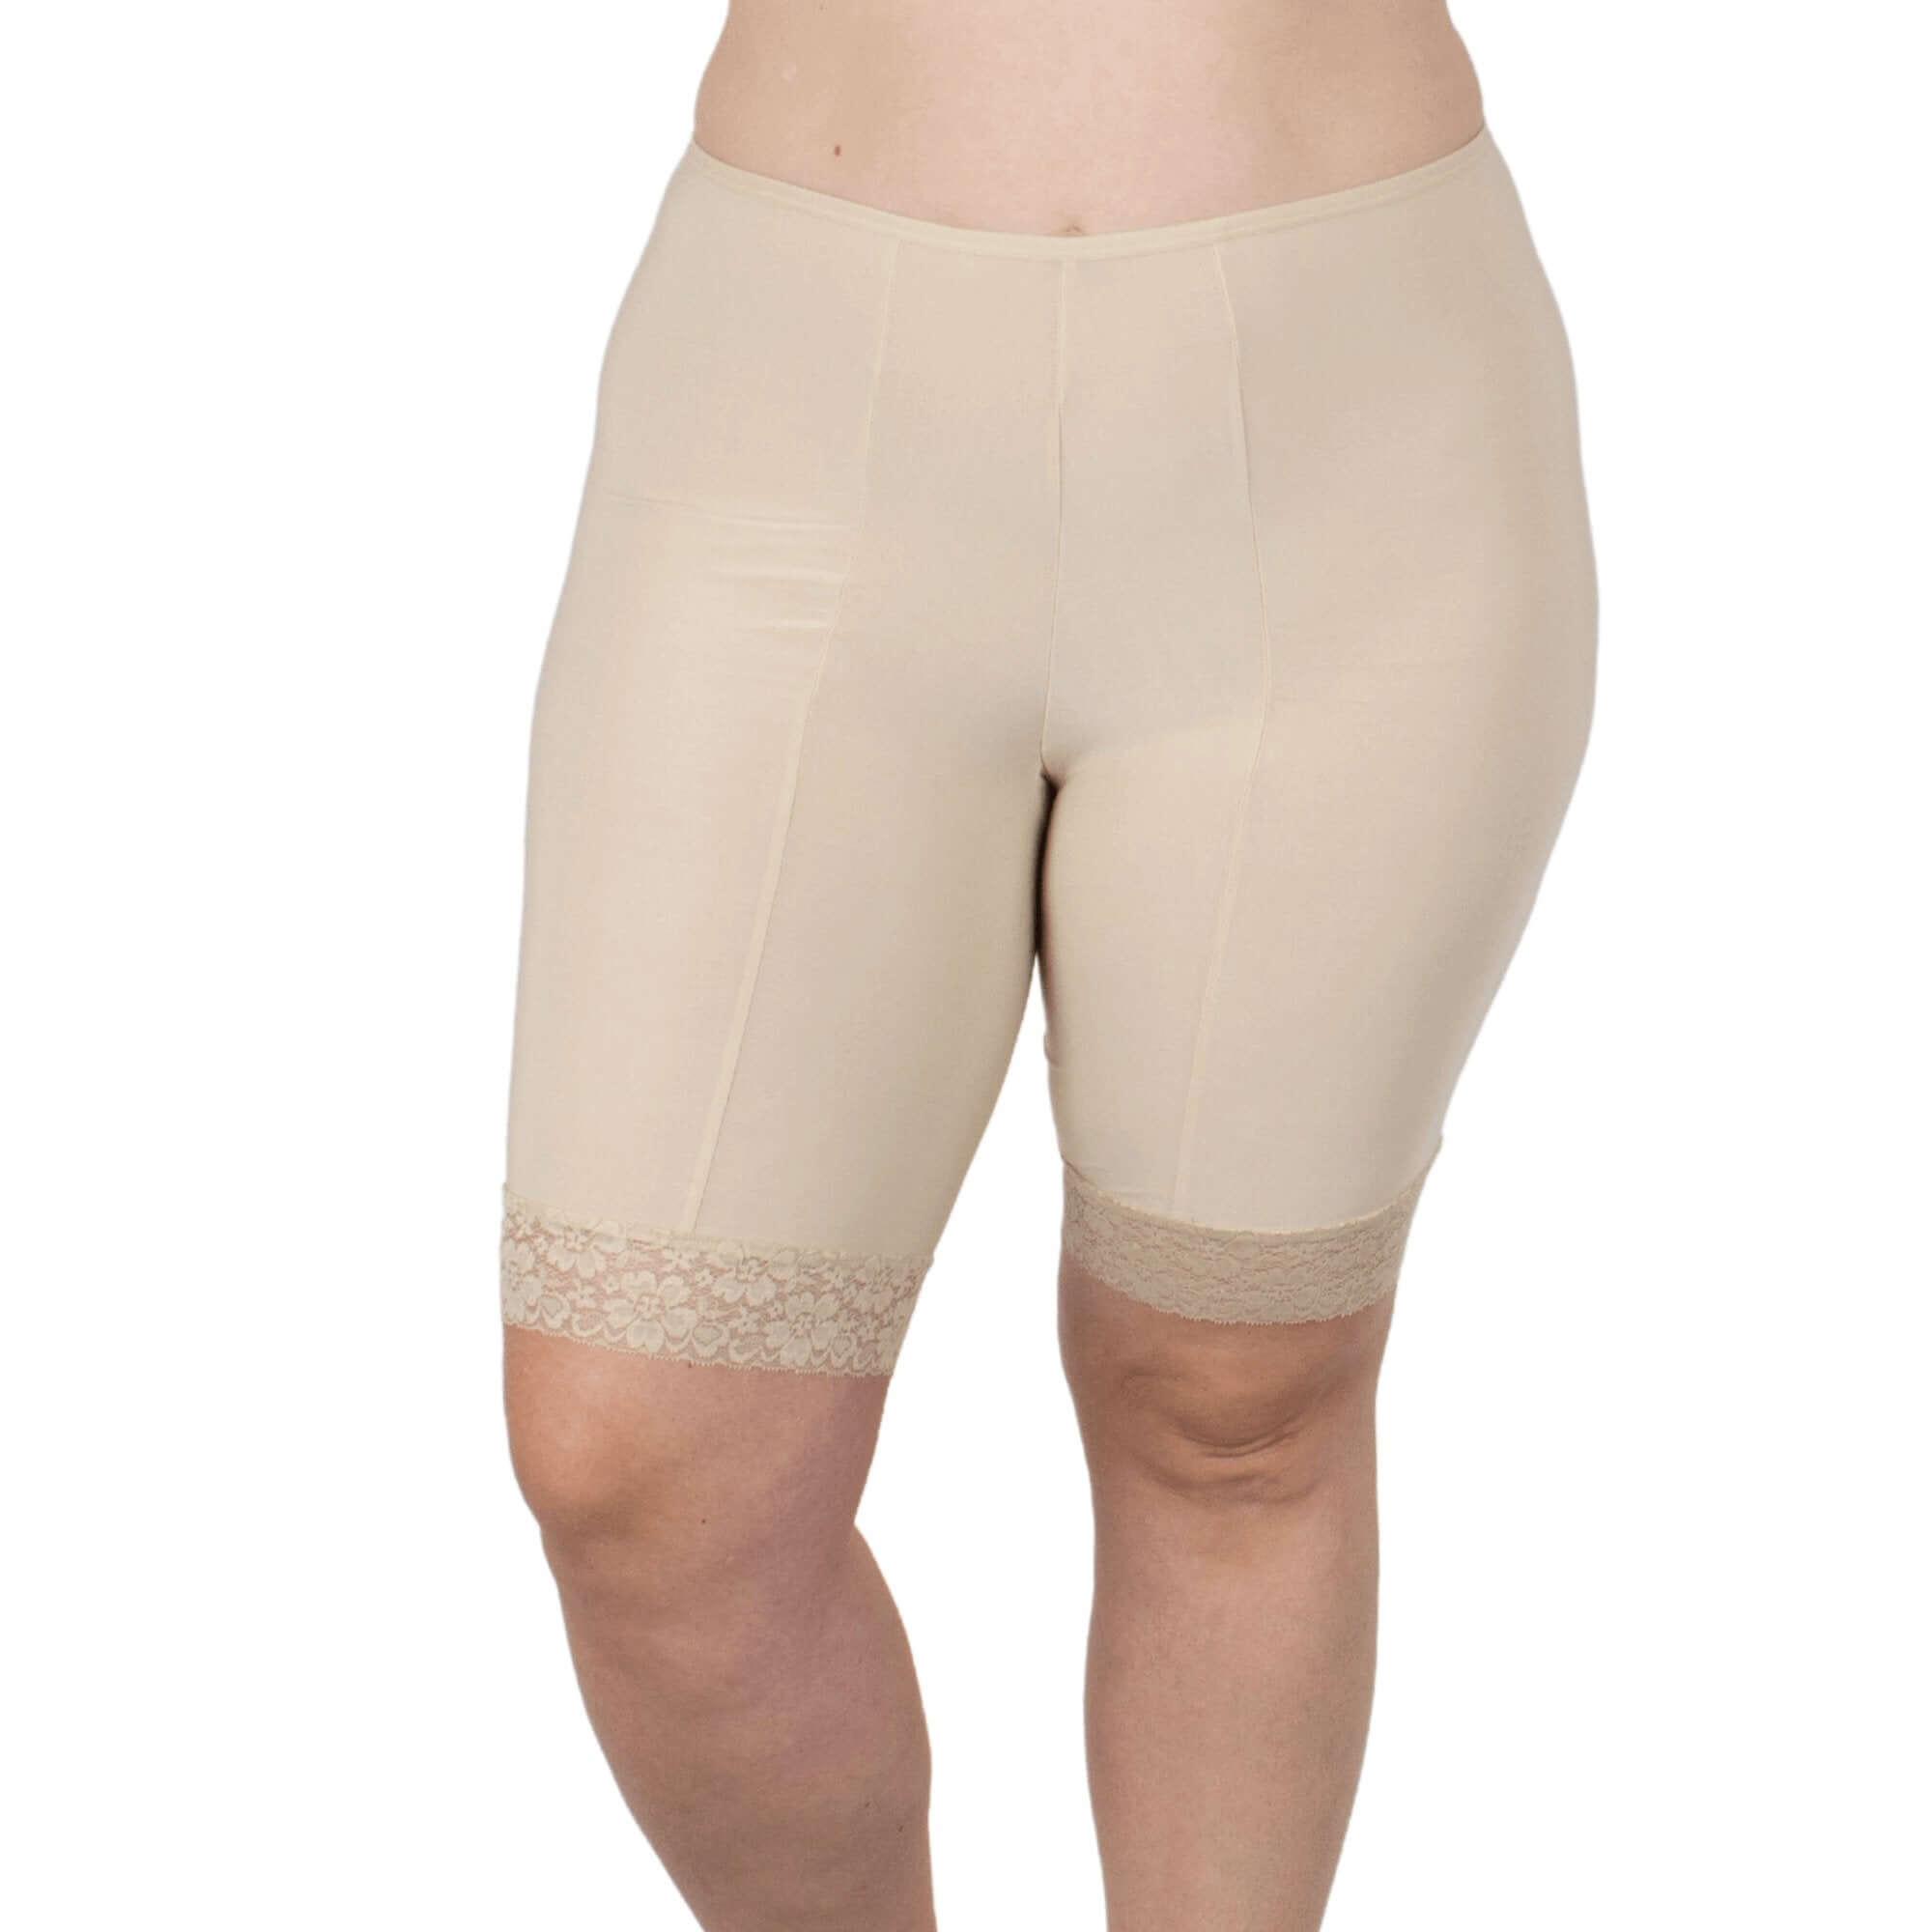 Anti-Chafing Slip Shorts, Breathable Stretchy Under Dresses